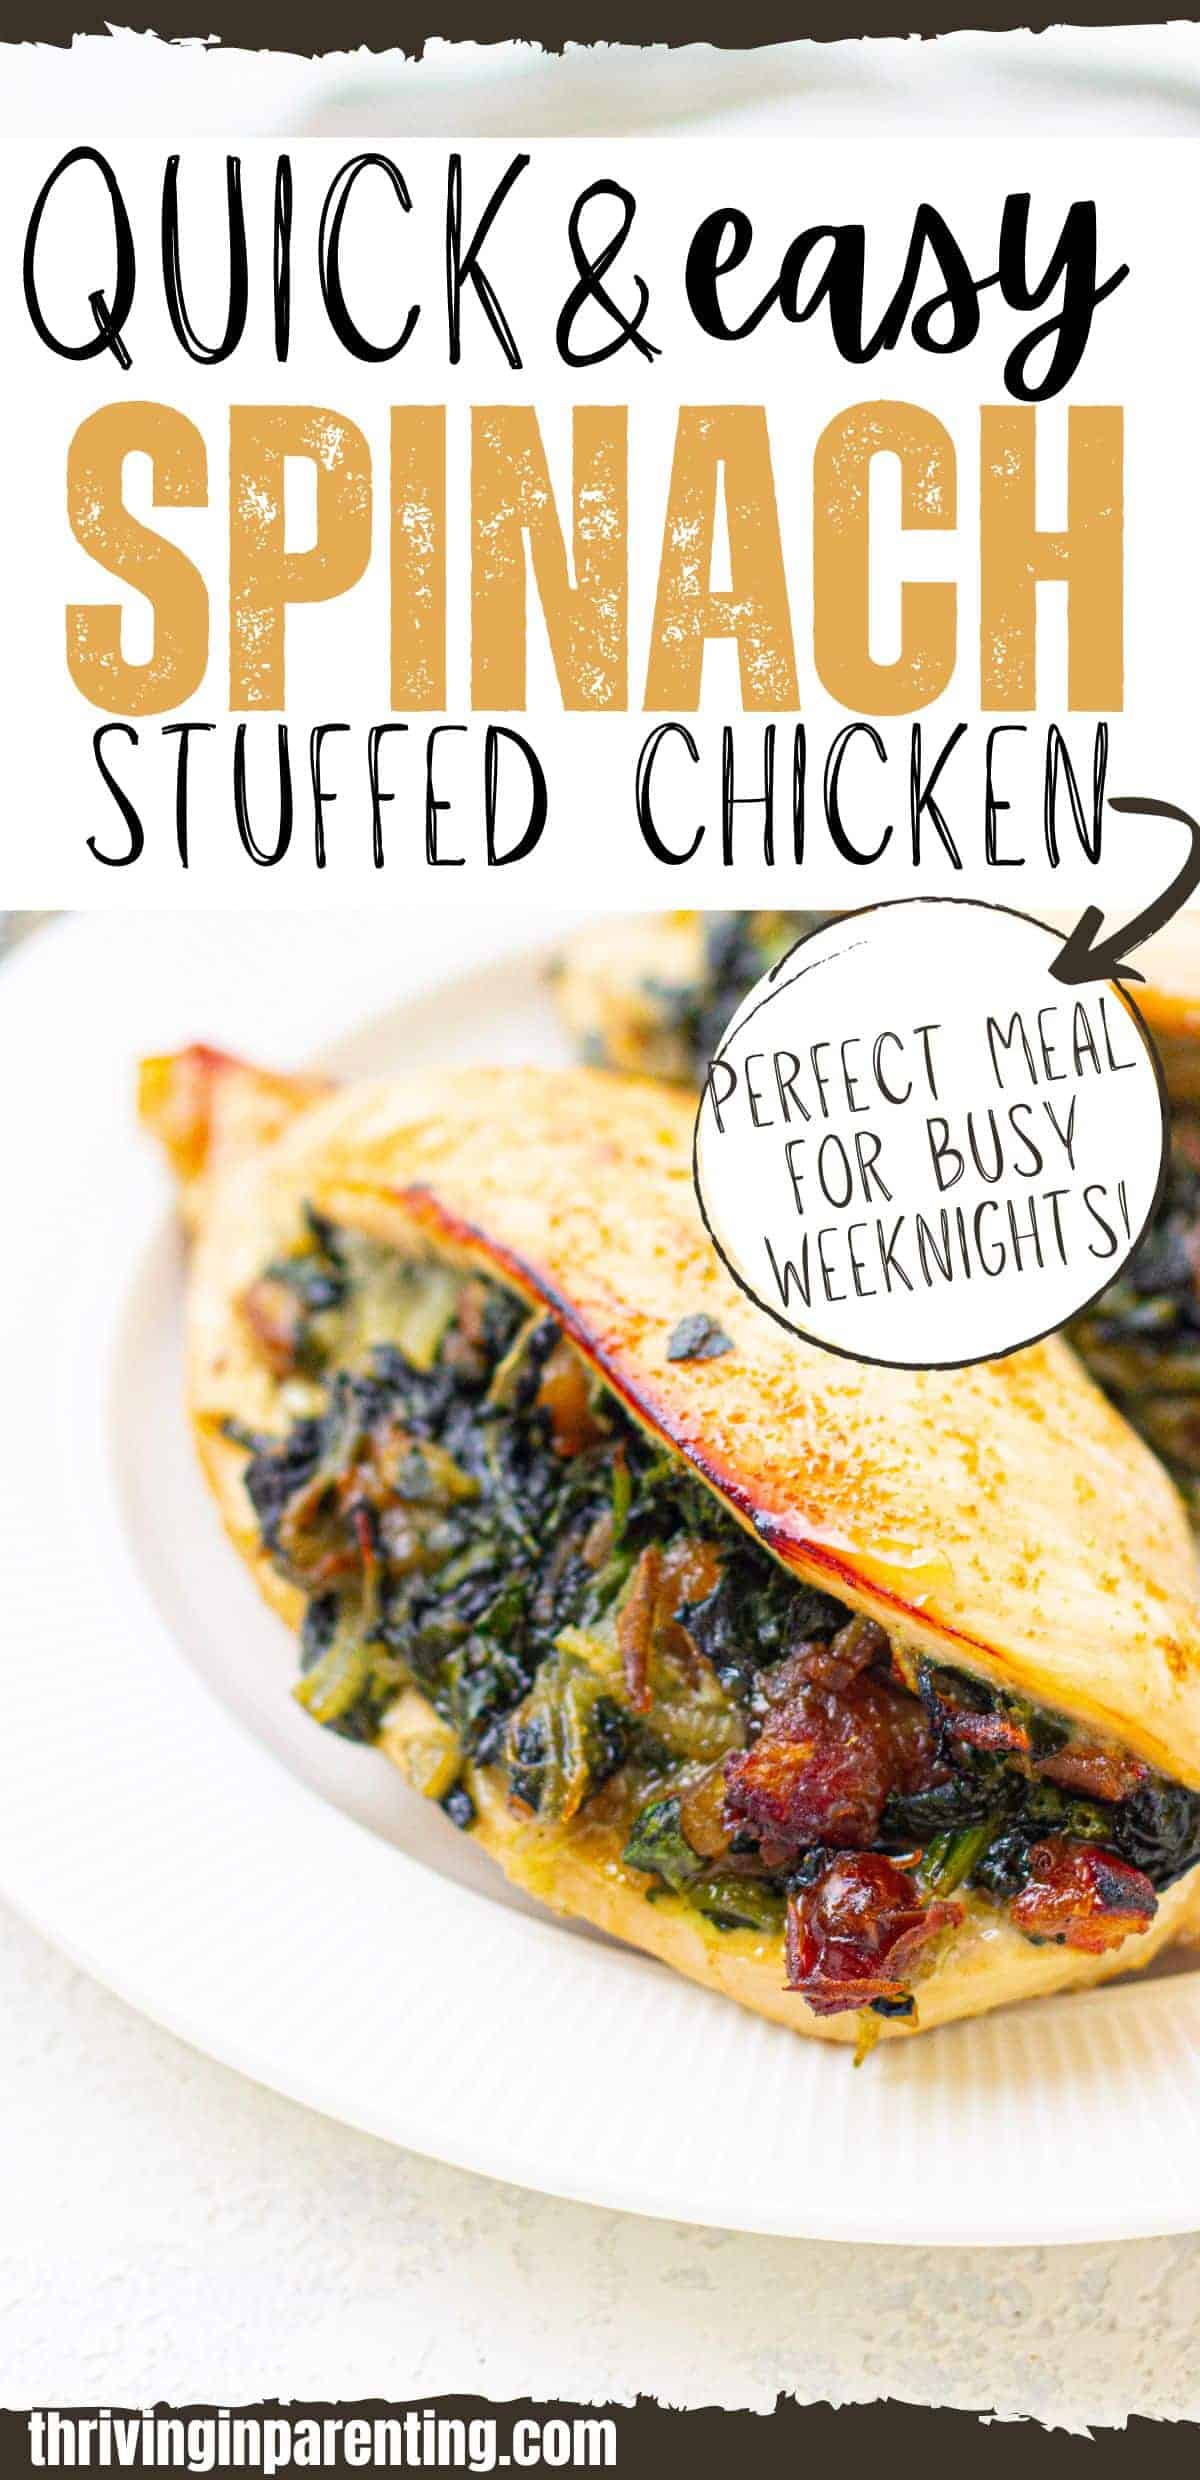 Closeup of spinach stuffed chicken on a white plate with text that reads quick and easy spinach stuffed chicken.